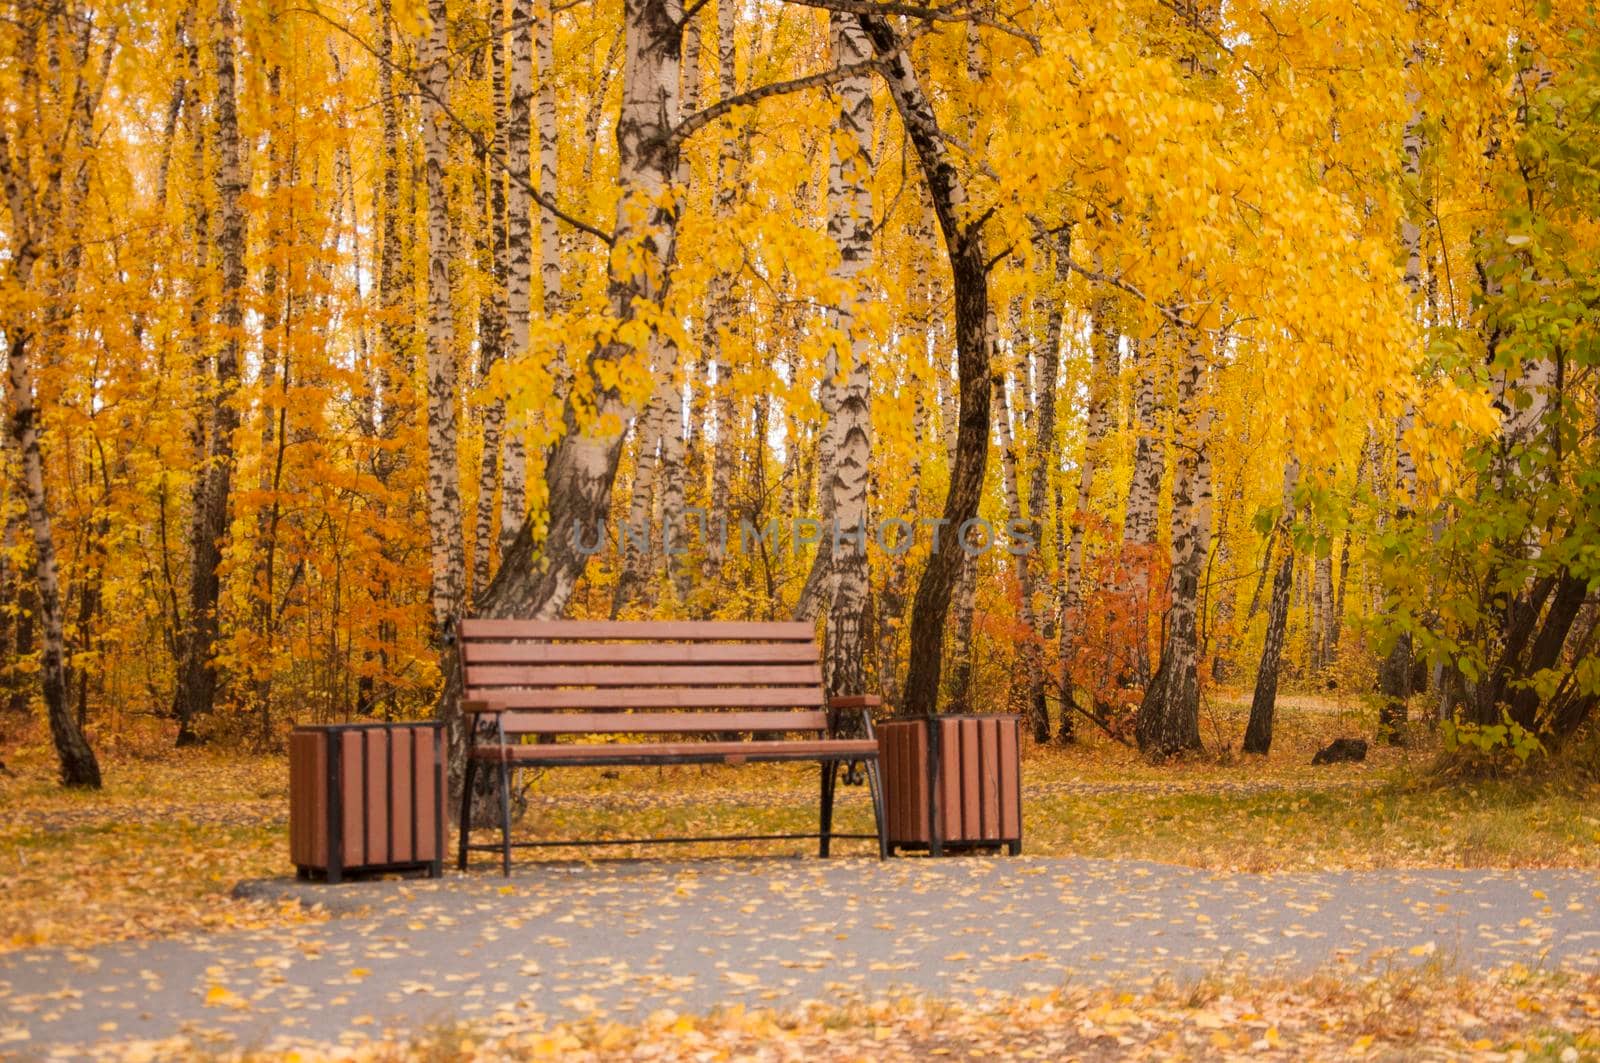 Autumn landscape, autumn in the city park. City park bench in the fall park, yellow fallen leaves on the road, autumn trees and golden autumn leaves, park landscape